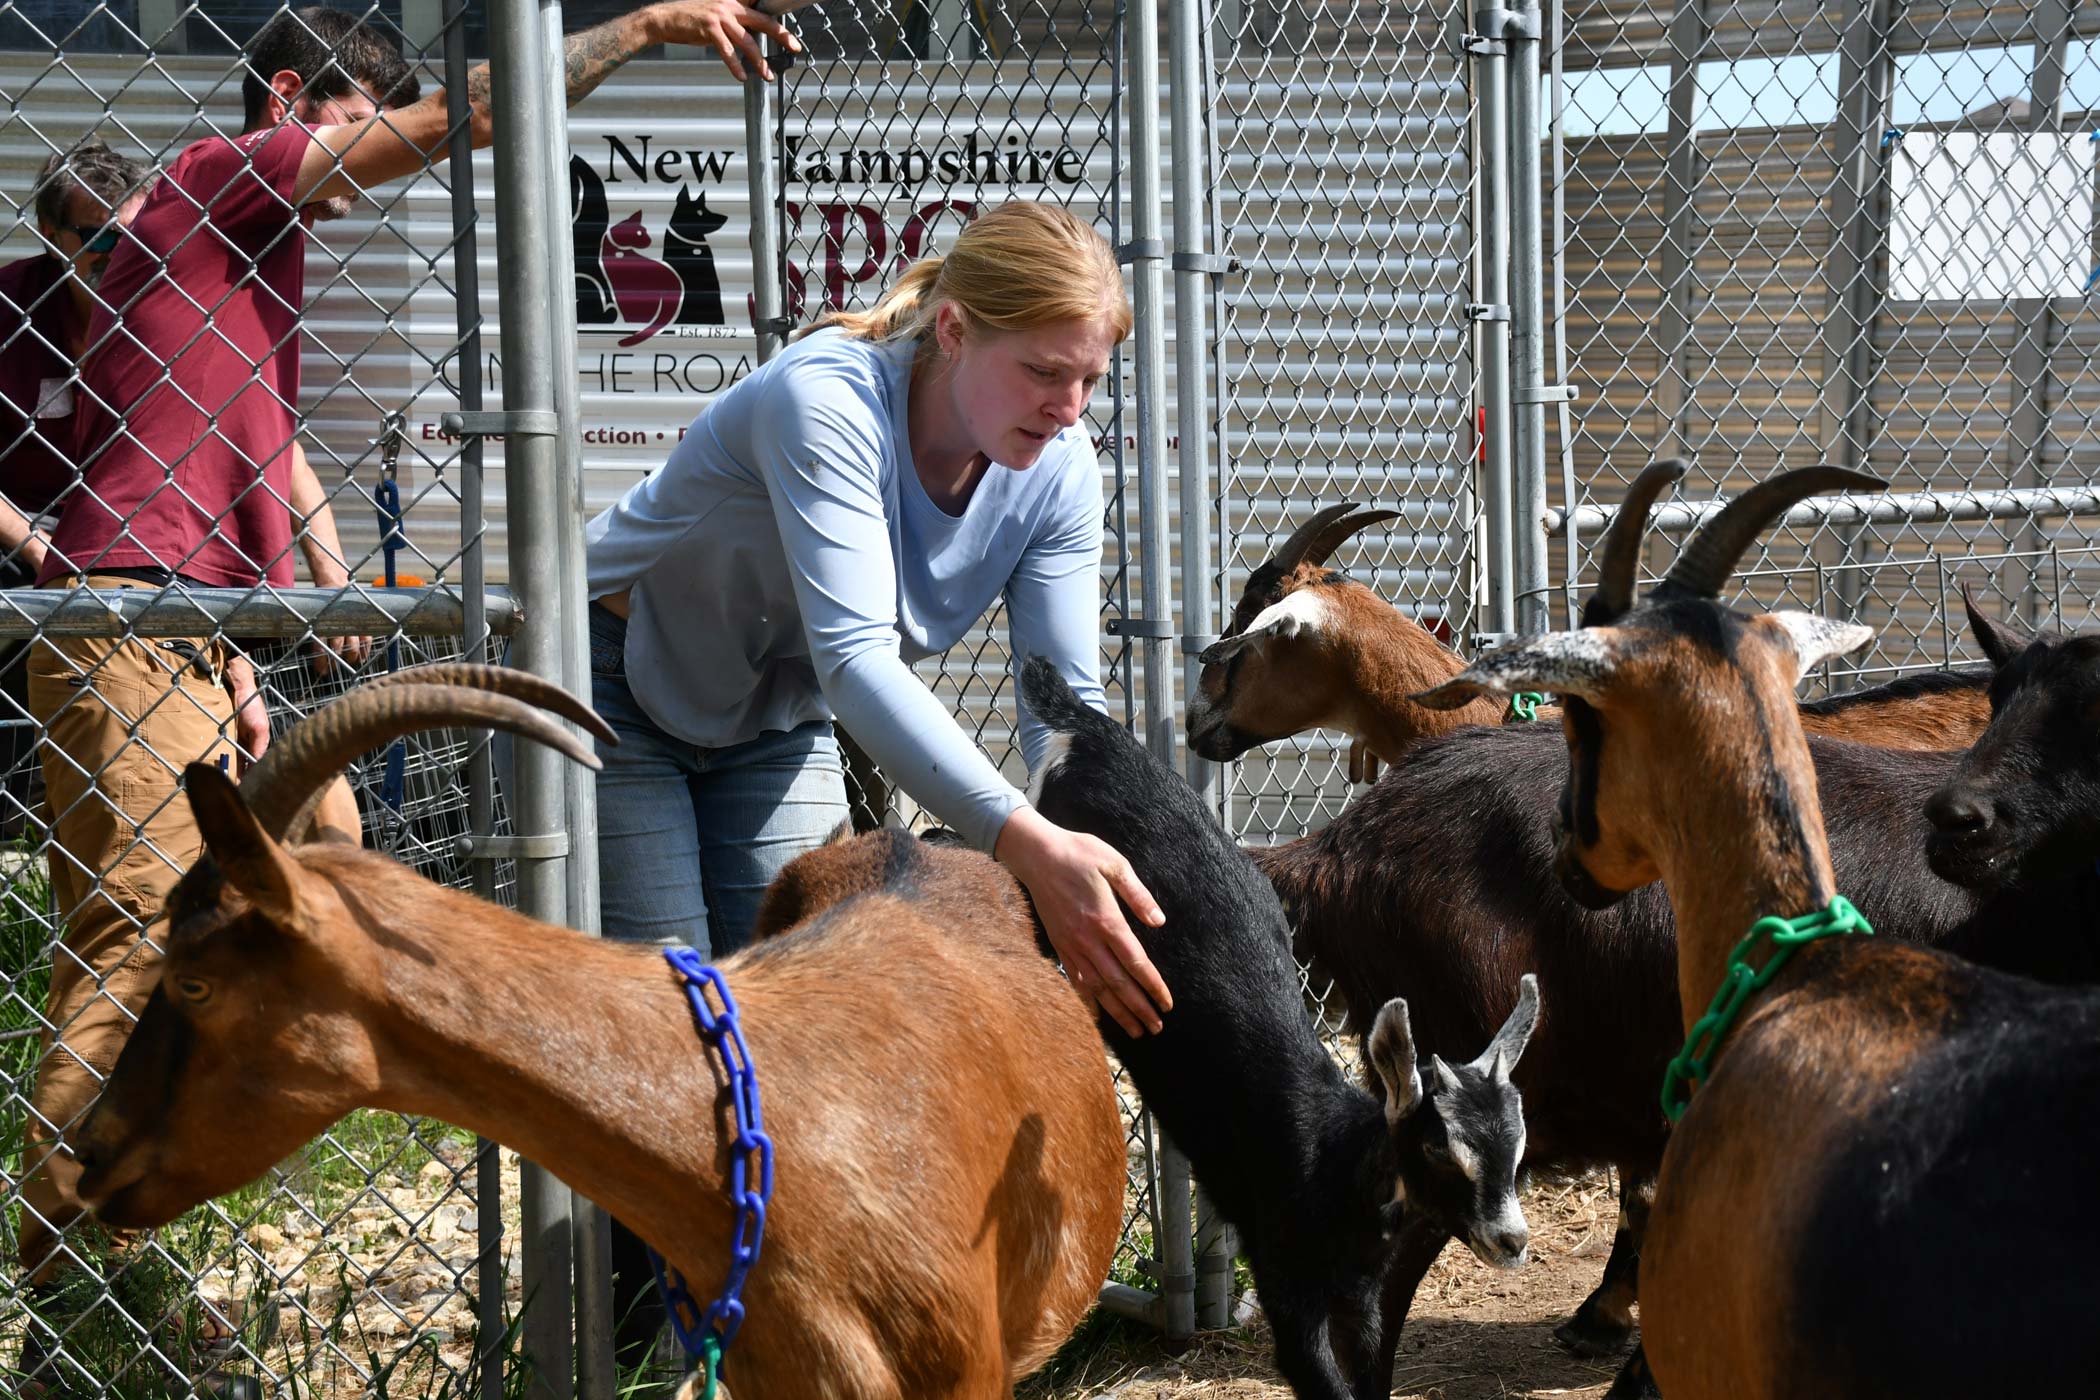 NHSPCA rescues 54 goats from 'extremely unhealthy conditions' at Lee farm